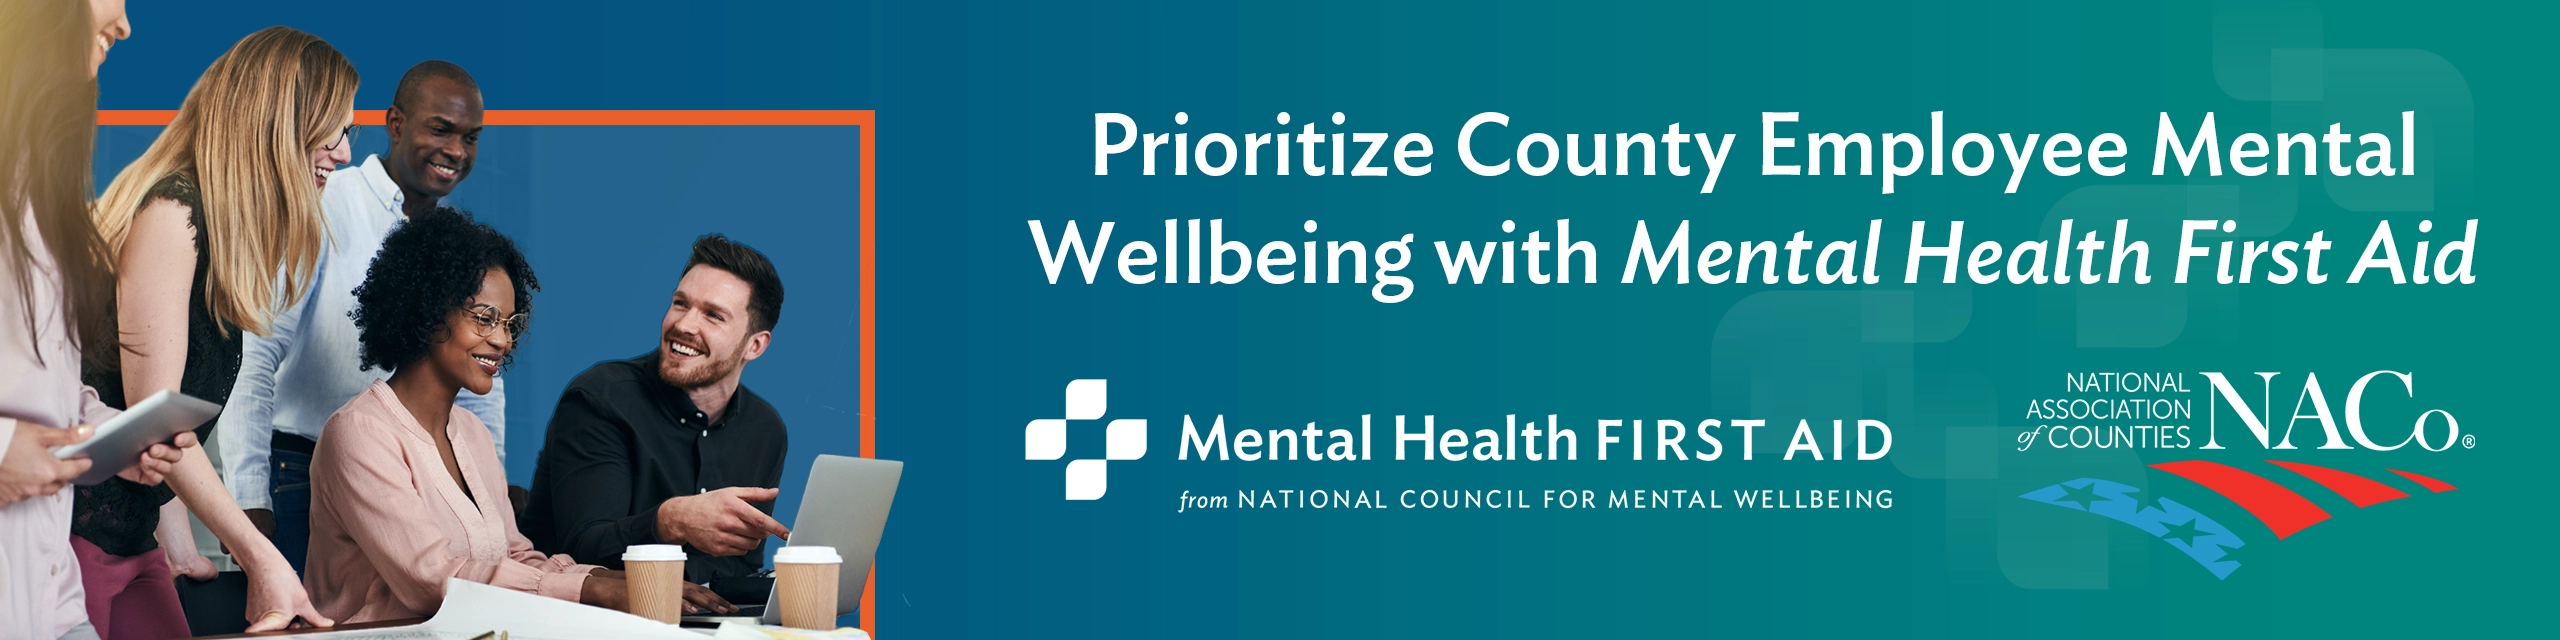 National Association of Counties Partners with National Council for Mental Wellbeing